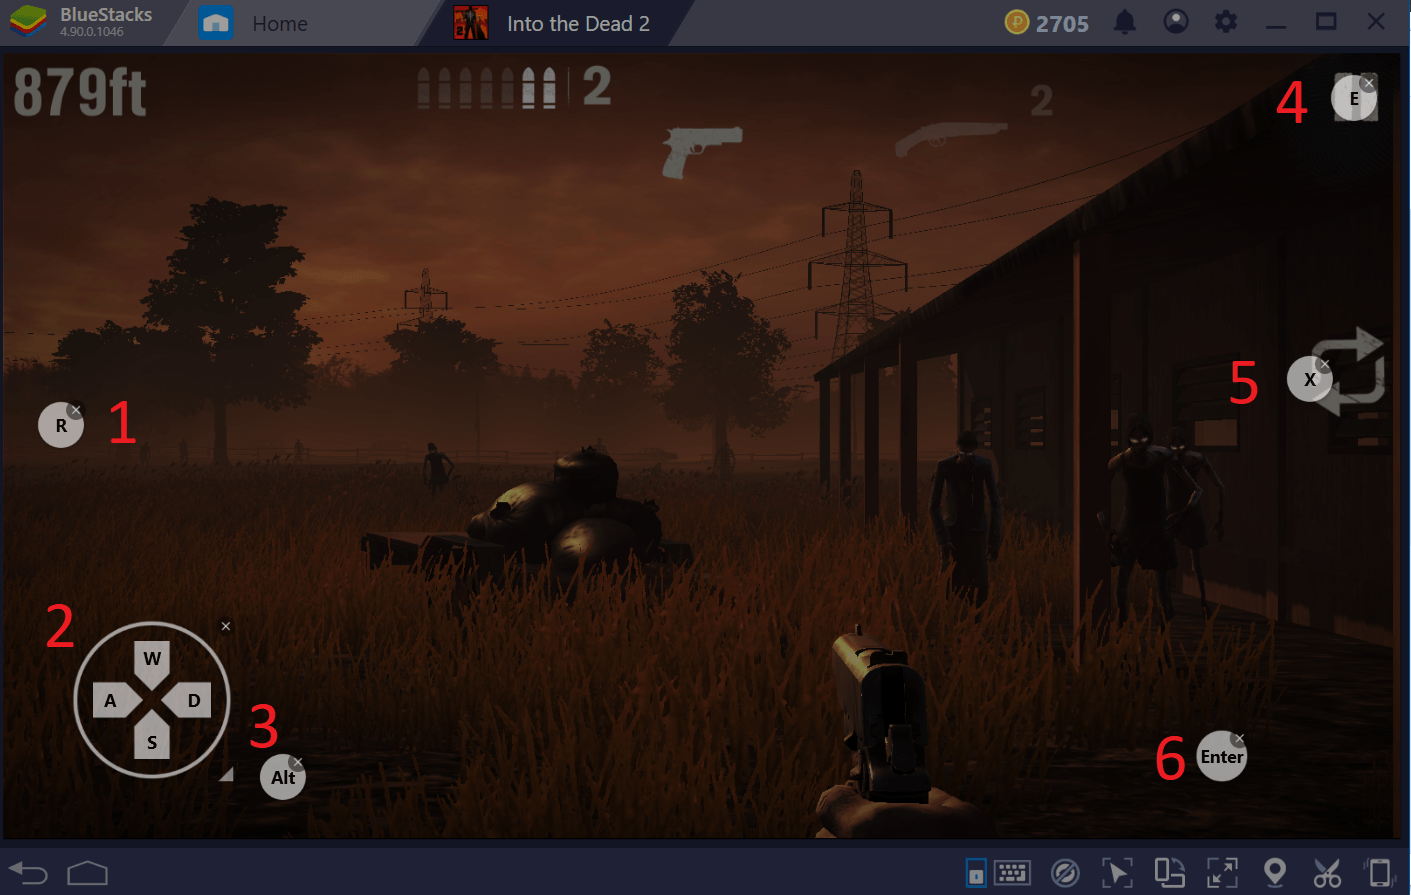 Guide to Playing Into The Dead 2 on BlueStacks